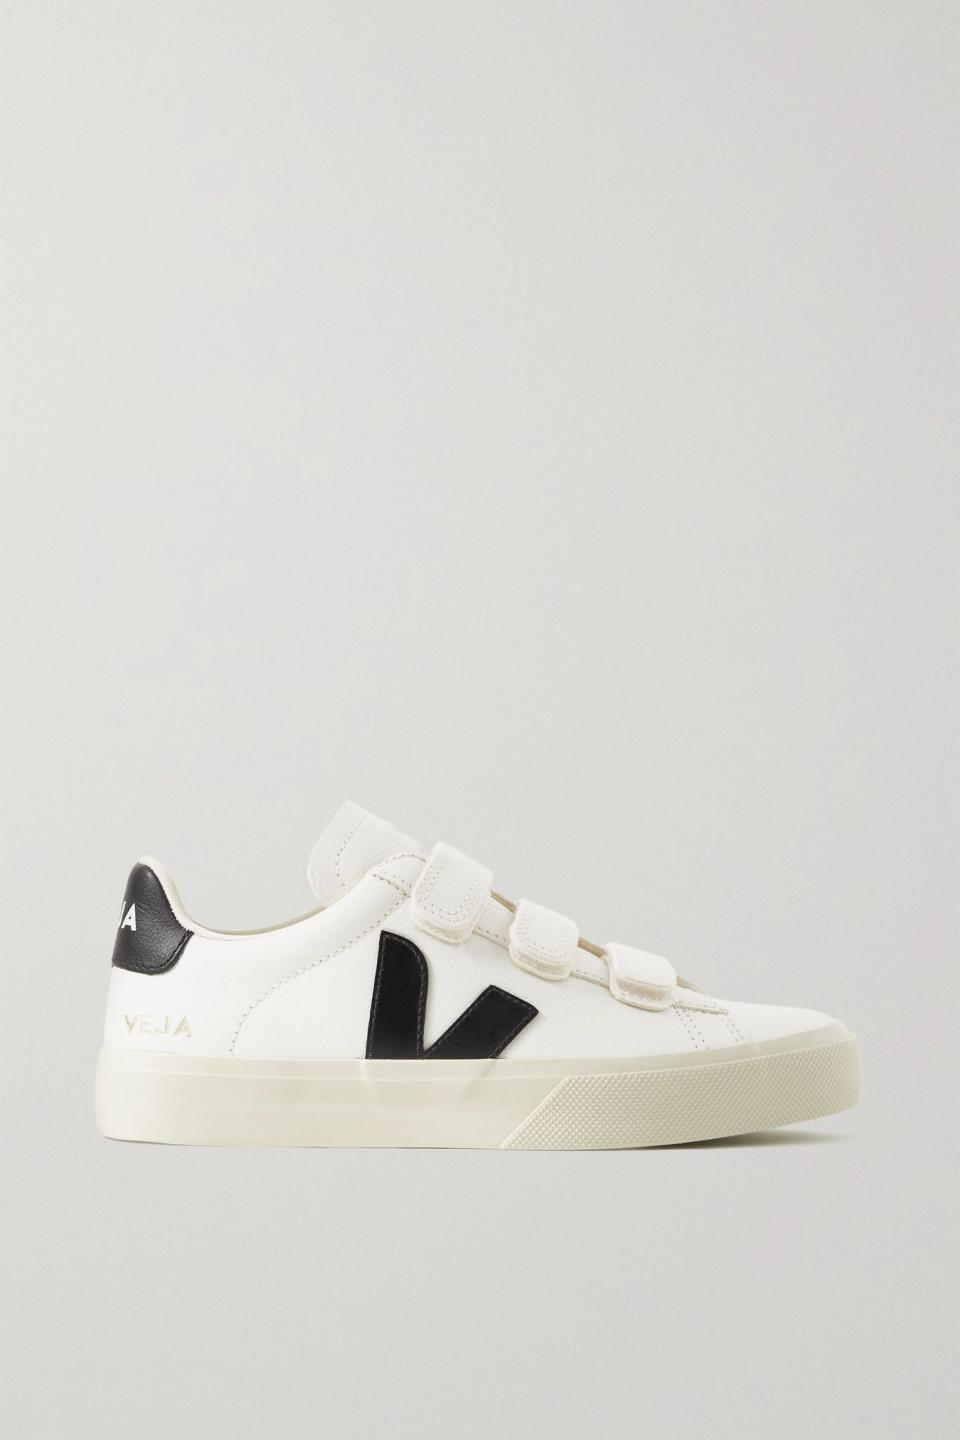 6) Recife Rubber-Trimmed Leather Sneakers